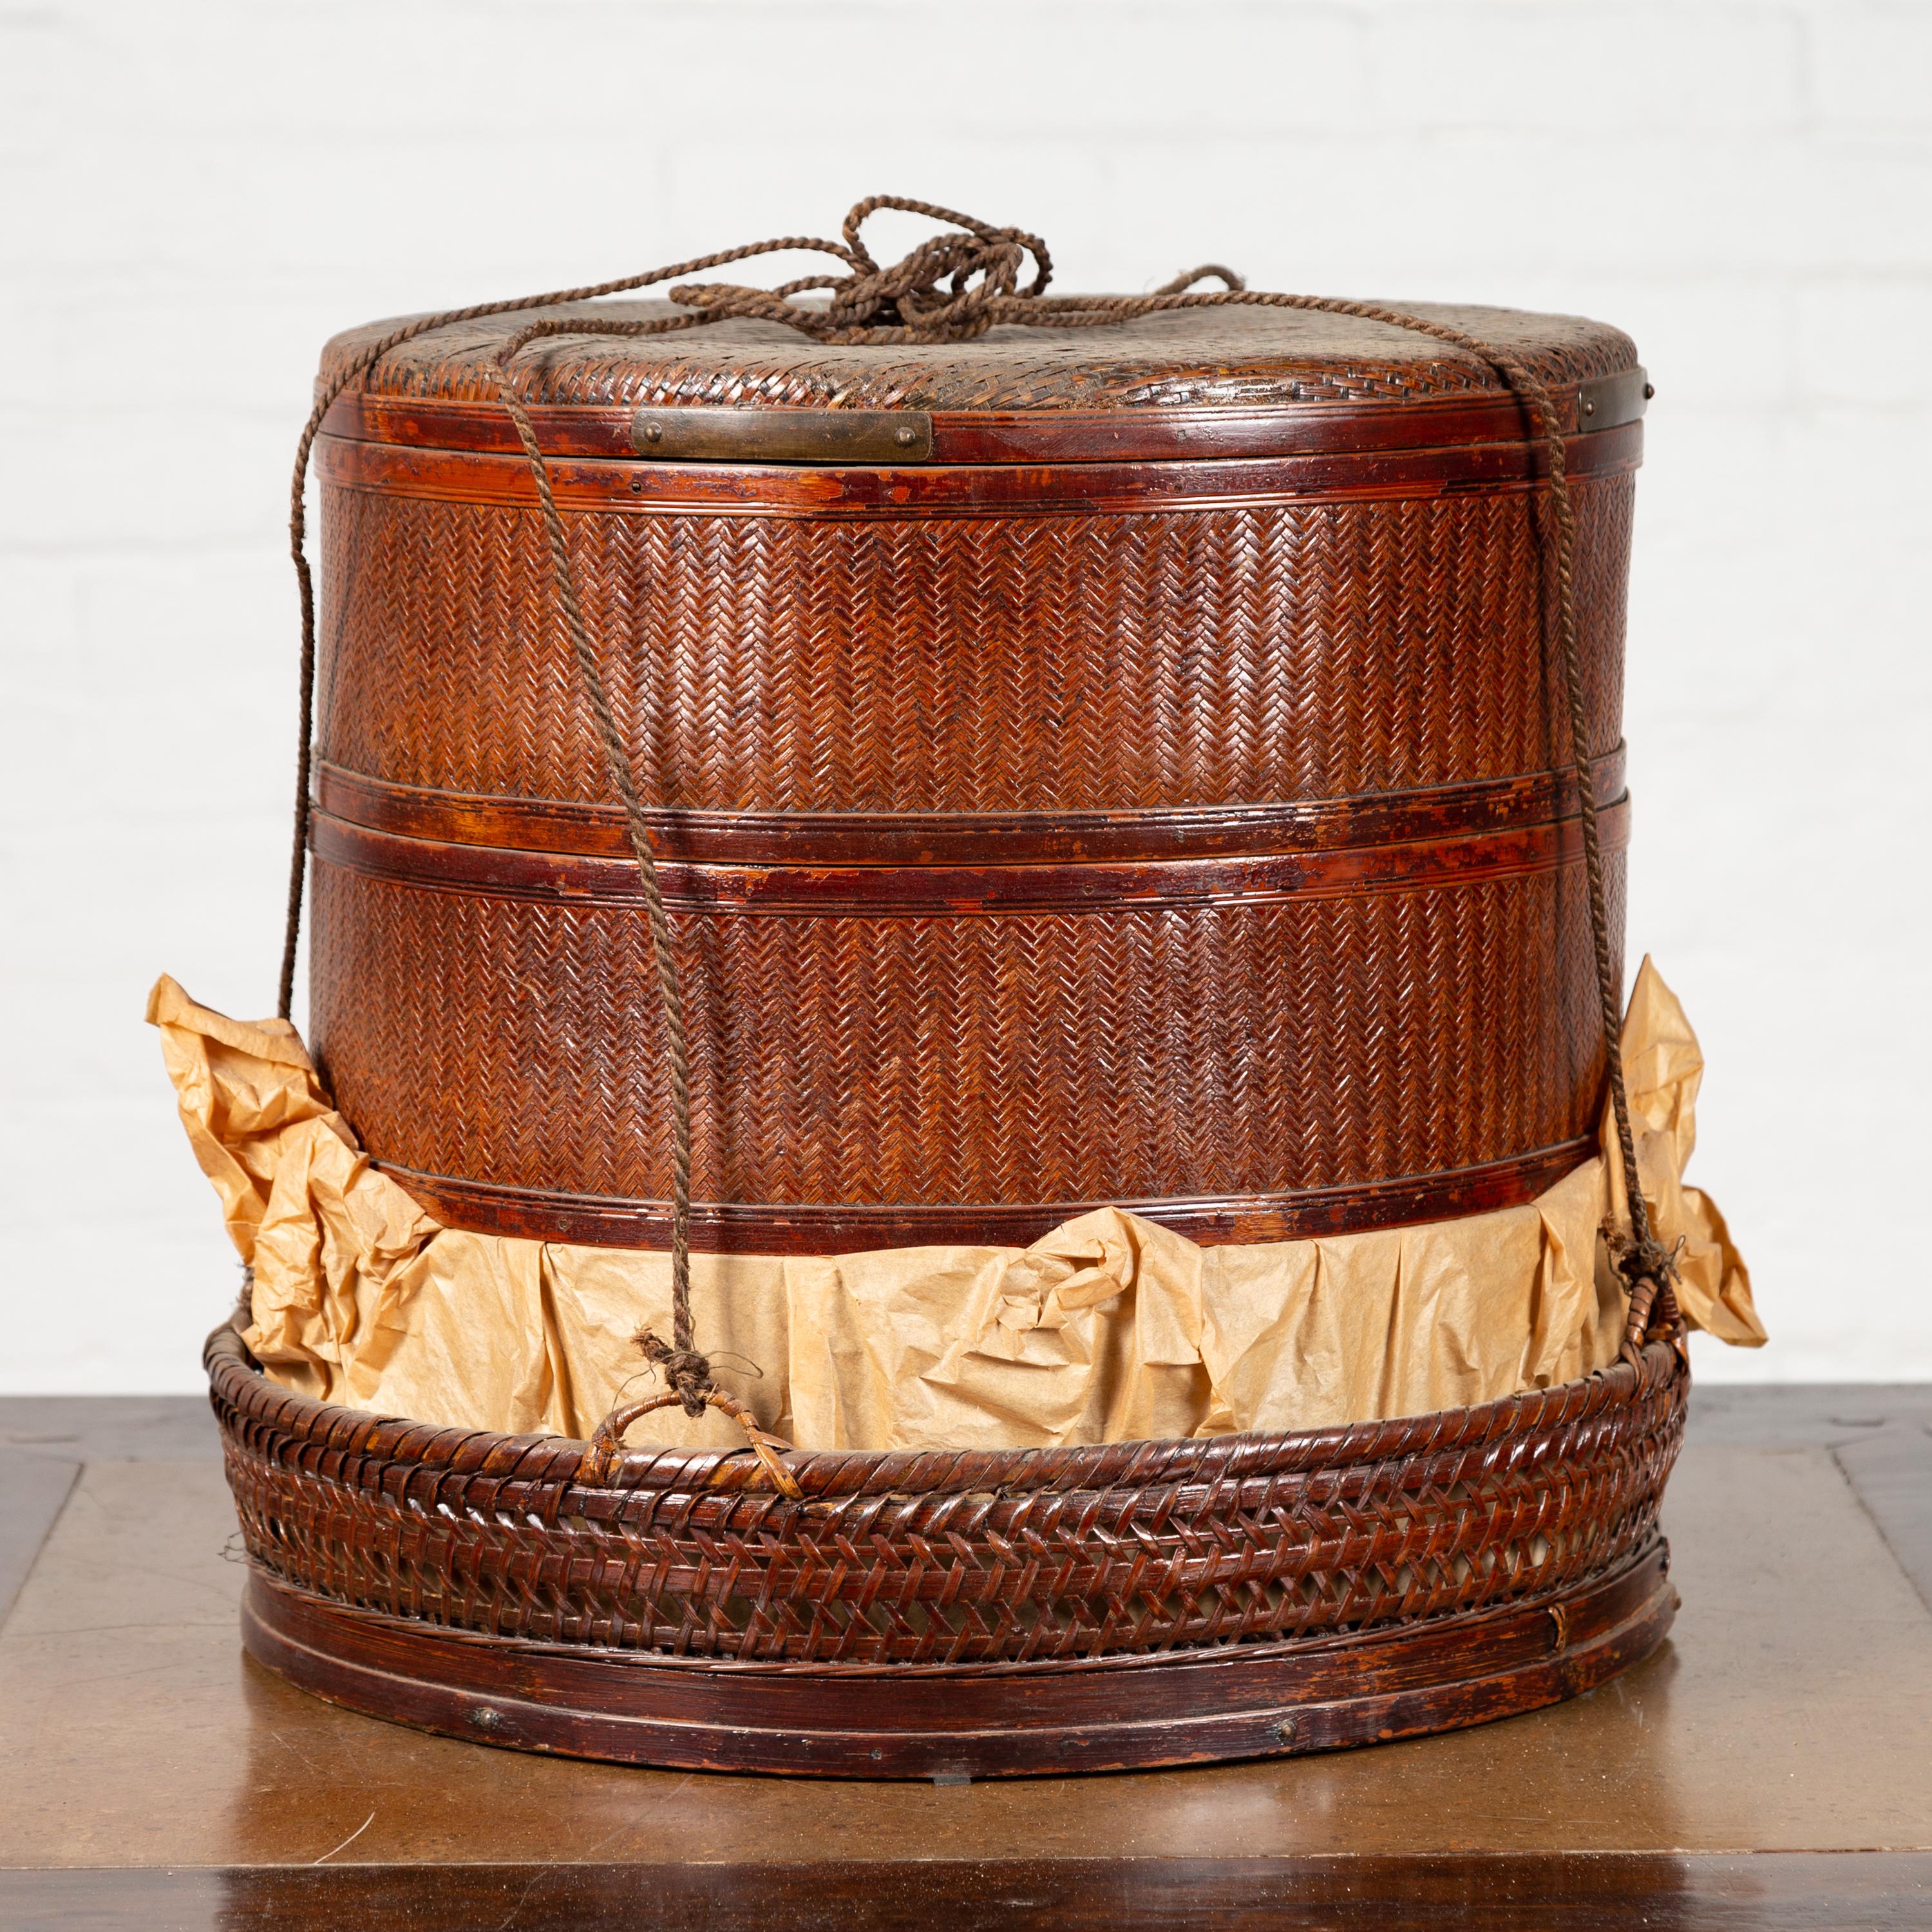 A Chinese antique tiered food basket from the 19th century, with stacking compartments, paper and rope ties. Born in China during the 19th century, this tiered food basket charms our eyes with its rustic appearance and convenient features. Made of